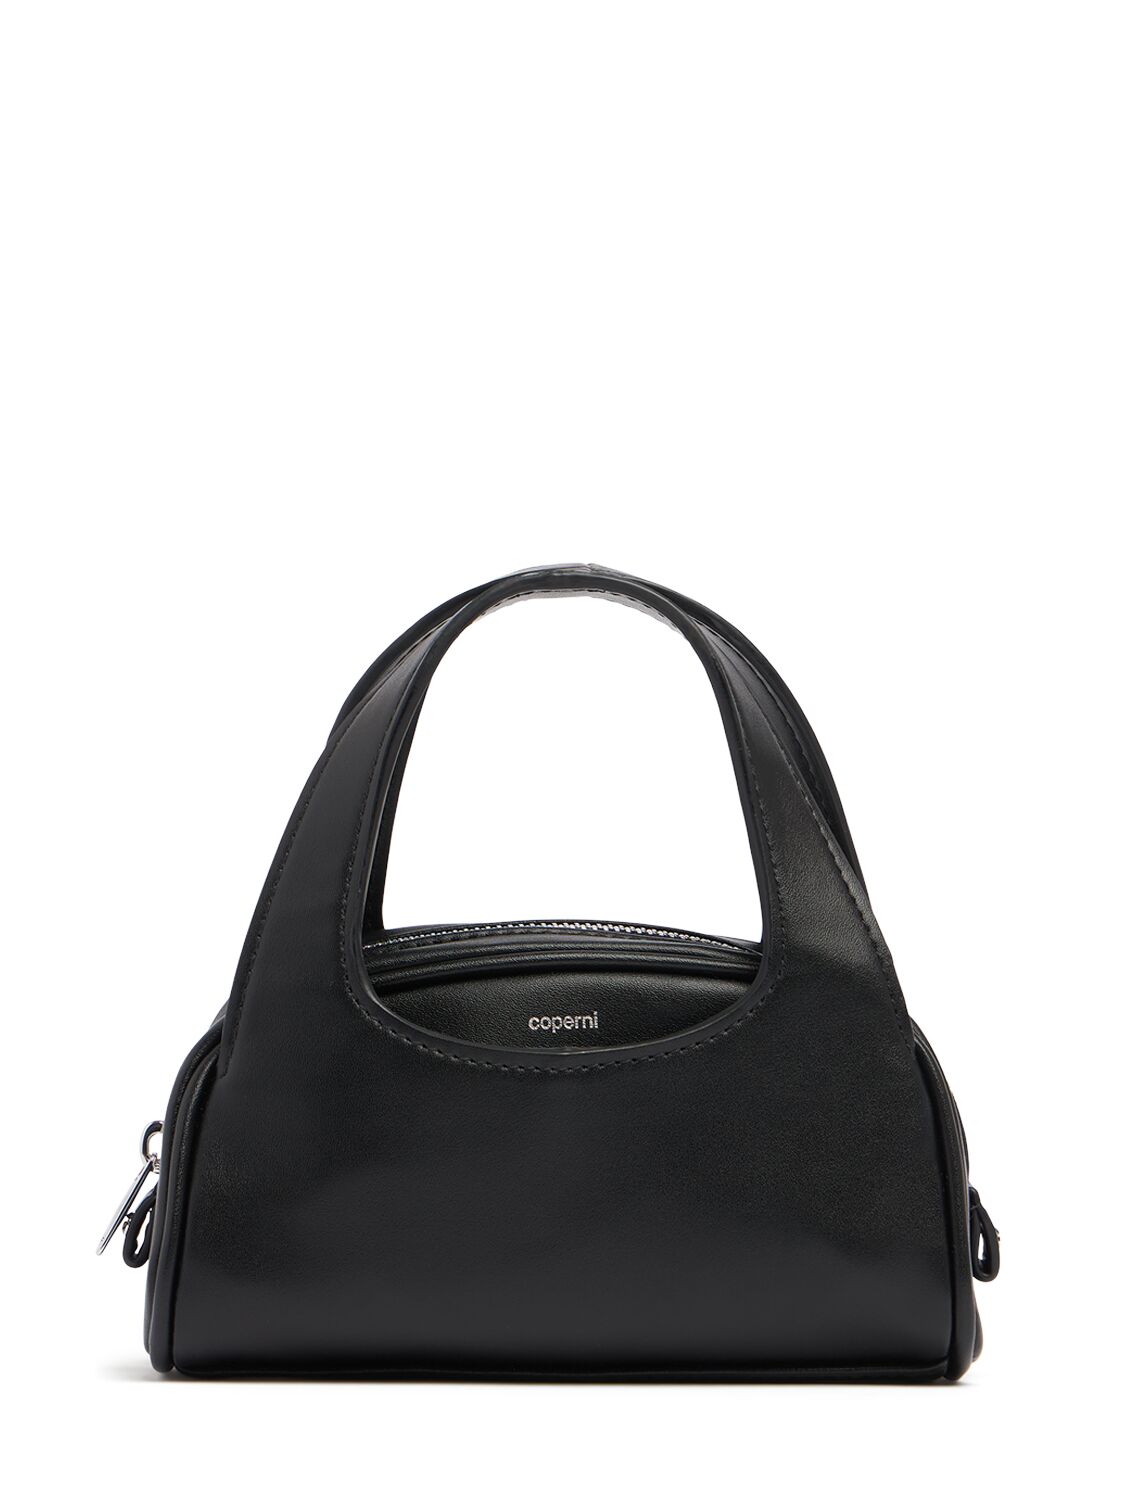 Coperni Small Faux Leather Top Handle Bag In 黑色